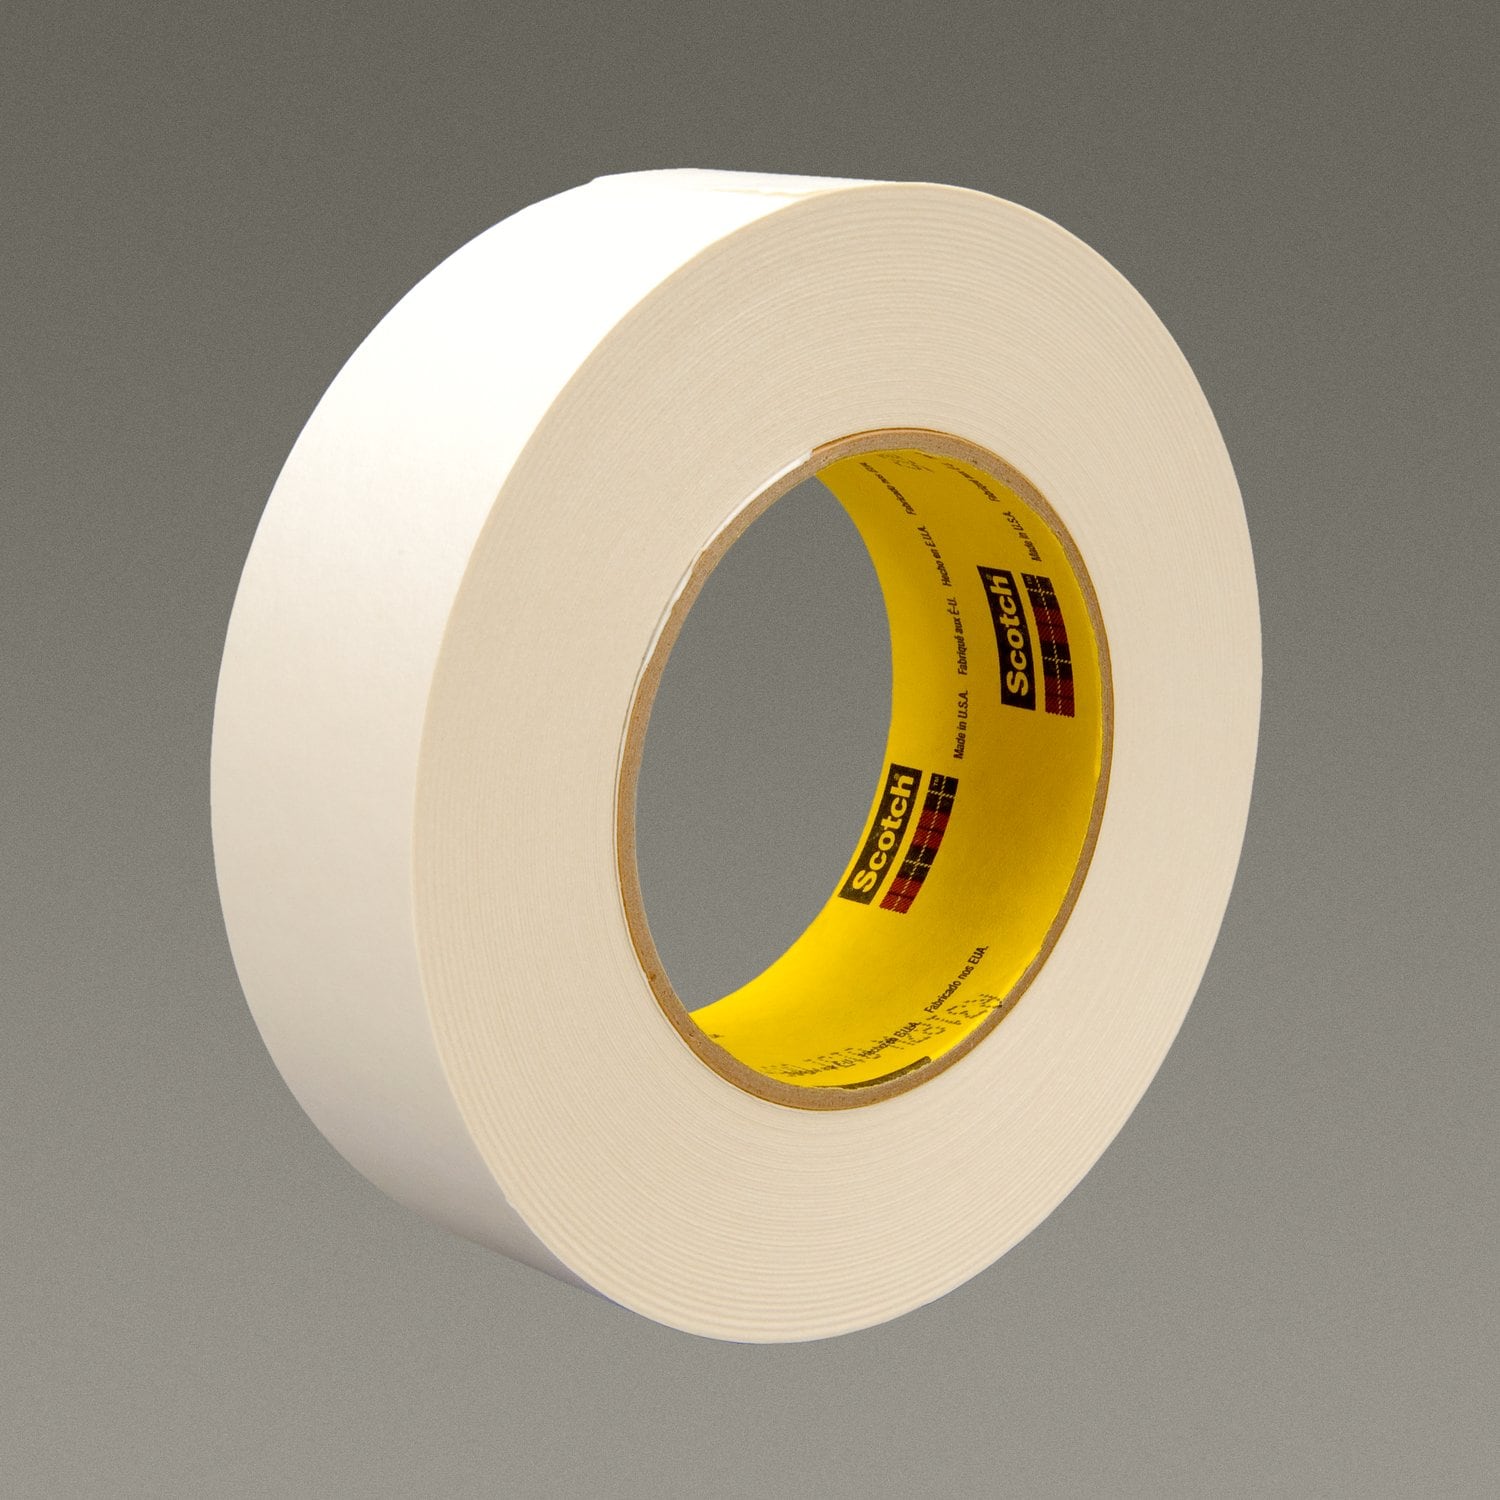 7100028046 - 3M Repulpable Strong Single Coated Tape R3187, White, 96 mm x 55 m, 7.5
mil, 8 rolls per case